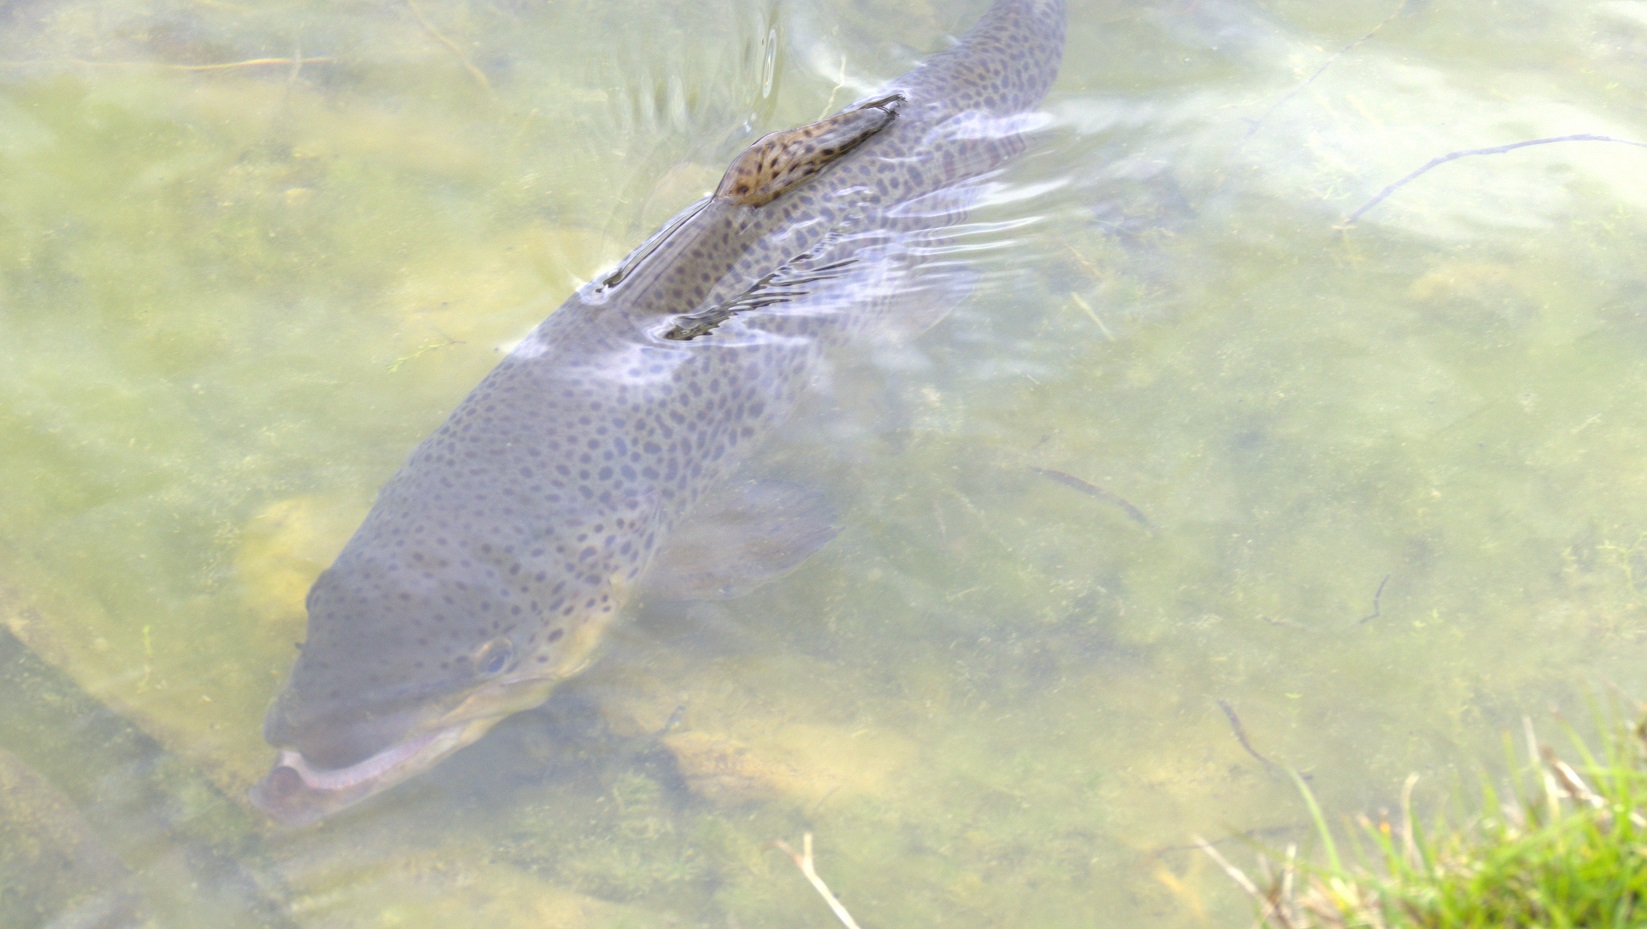 Very clever brown trout feeding in the shallows